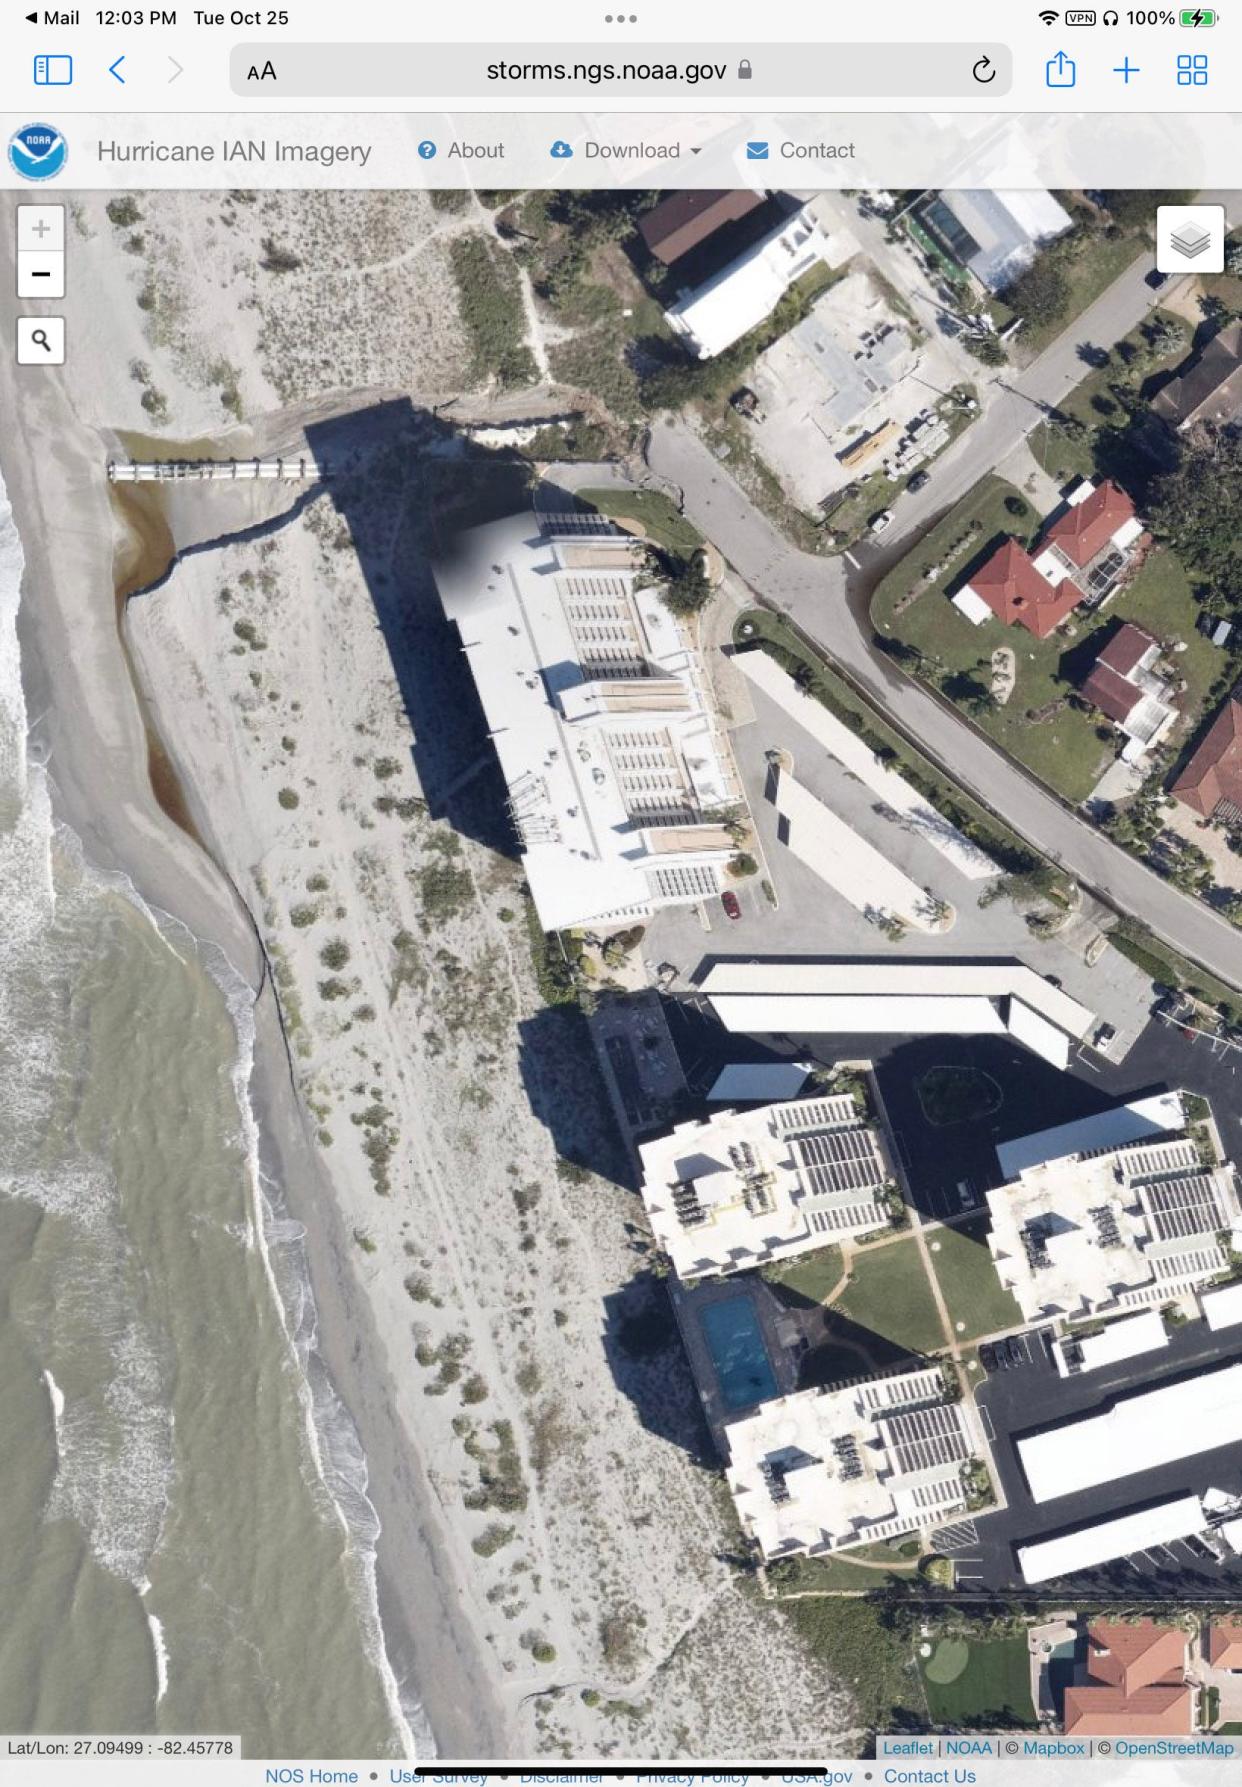 This NOAA satellite image, taken on Sept. 29 after Hurricane Ian made landfall, shows erosion of Alhambra Road near the Venice Sands condominium in the city of Venice, as well as beach erosion surrounding the city’s Stormwater Outfall No. 2. Prior to Ian, a majority of the length of the now exposed twin outfall pipes were covered by dry sand.